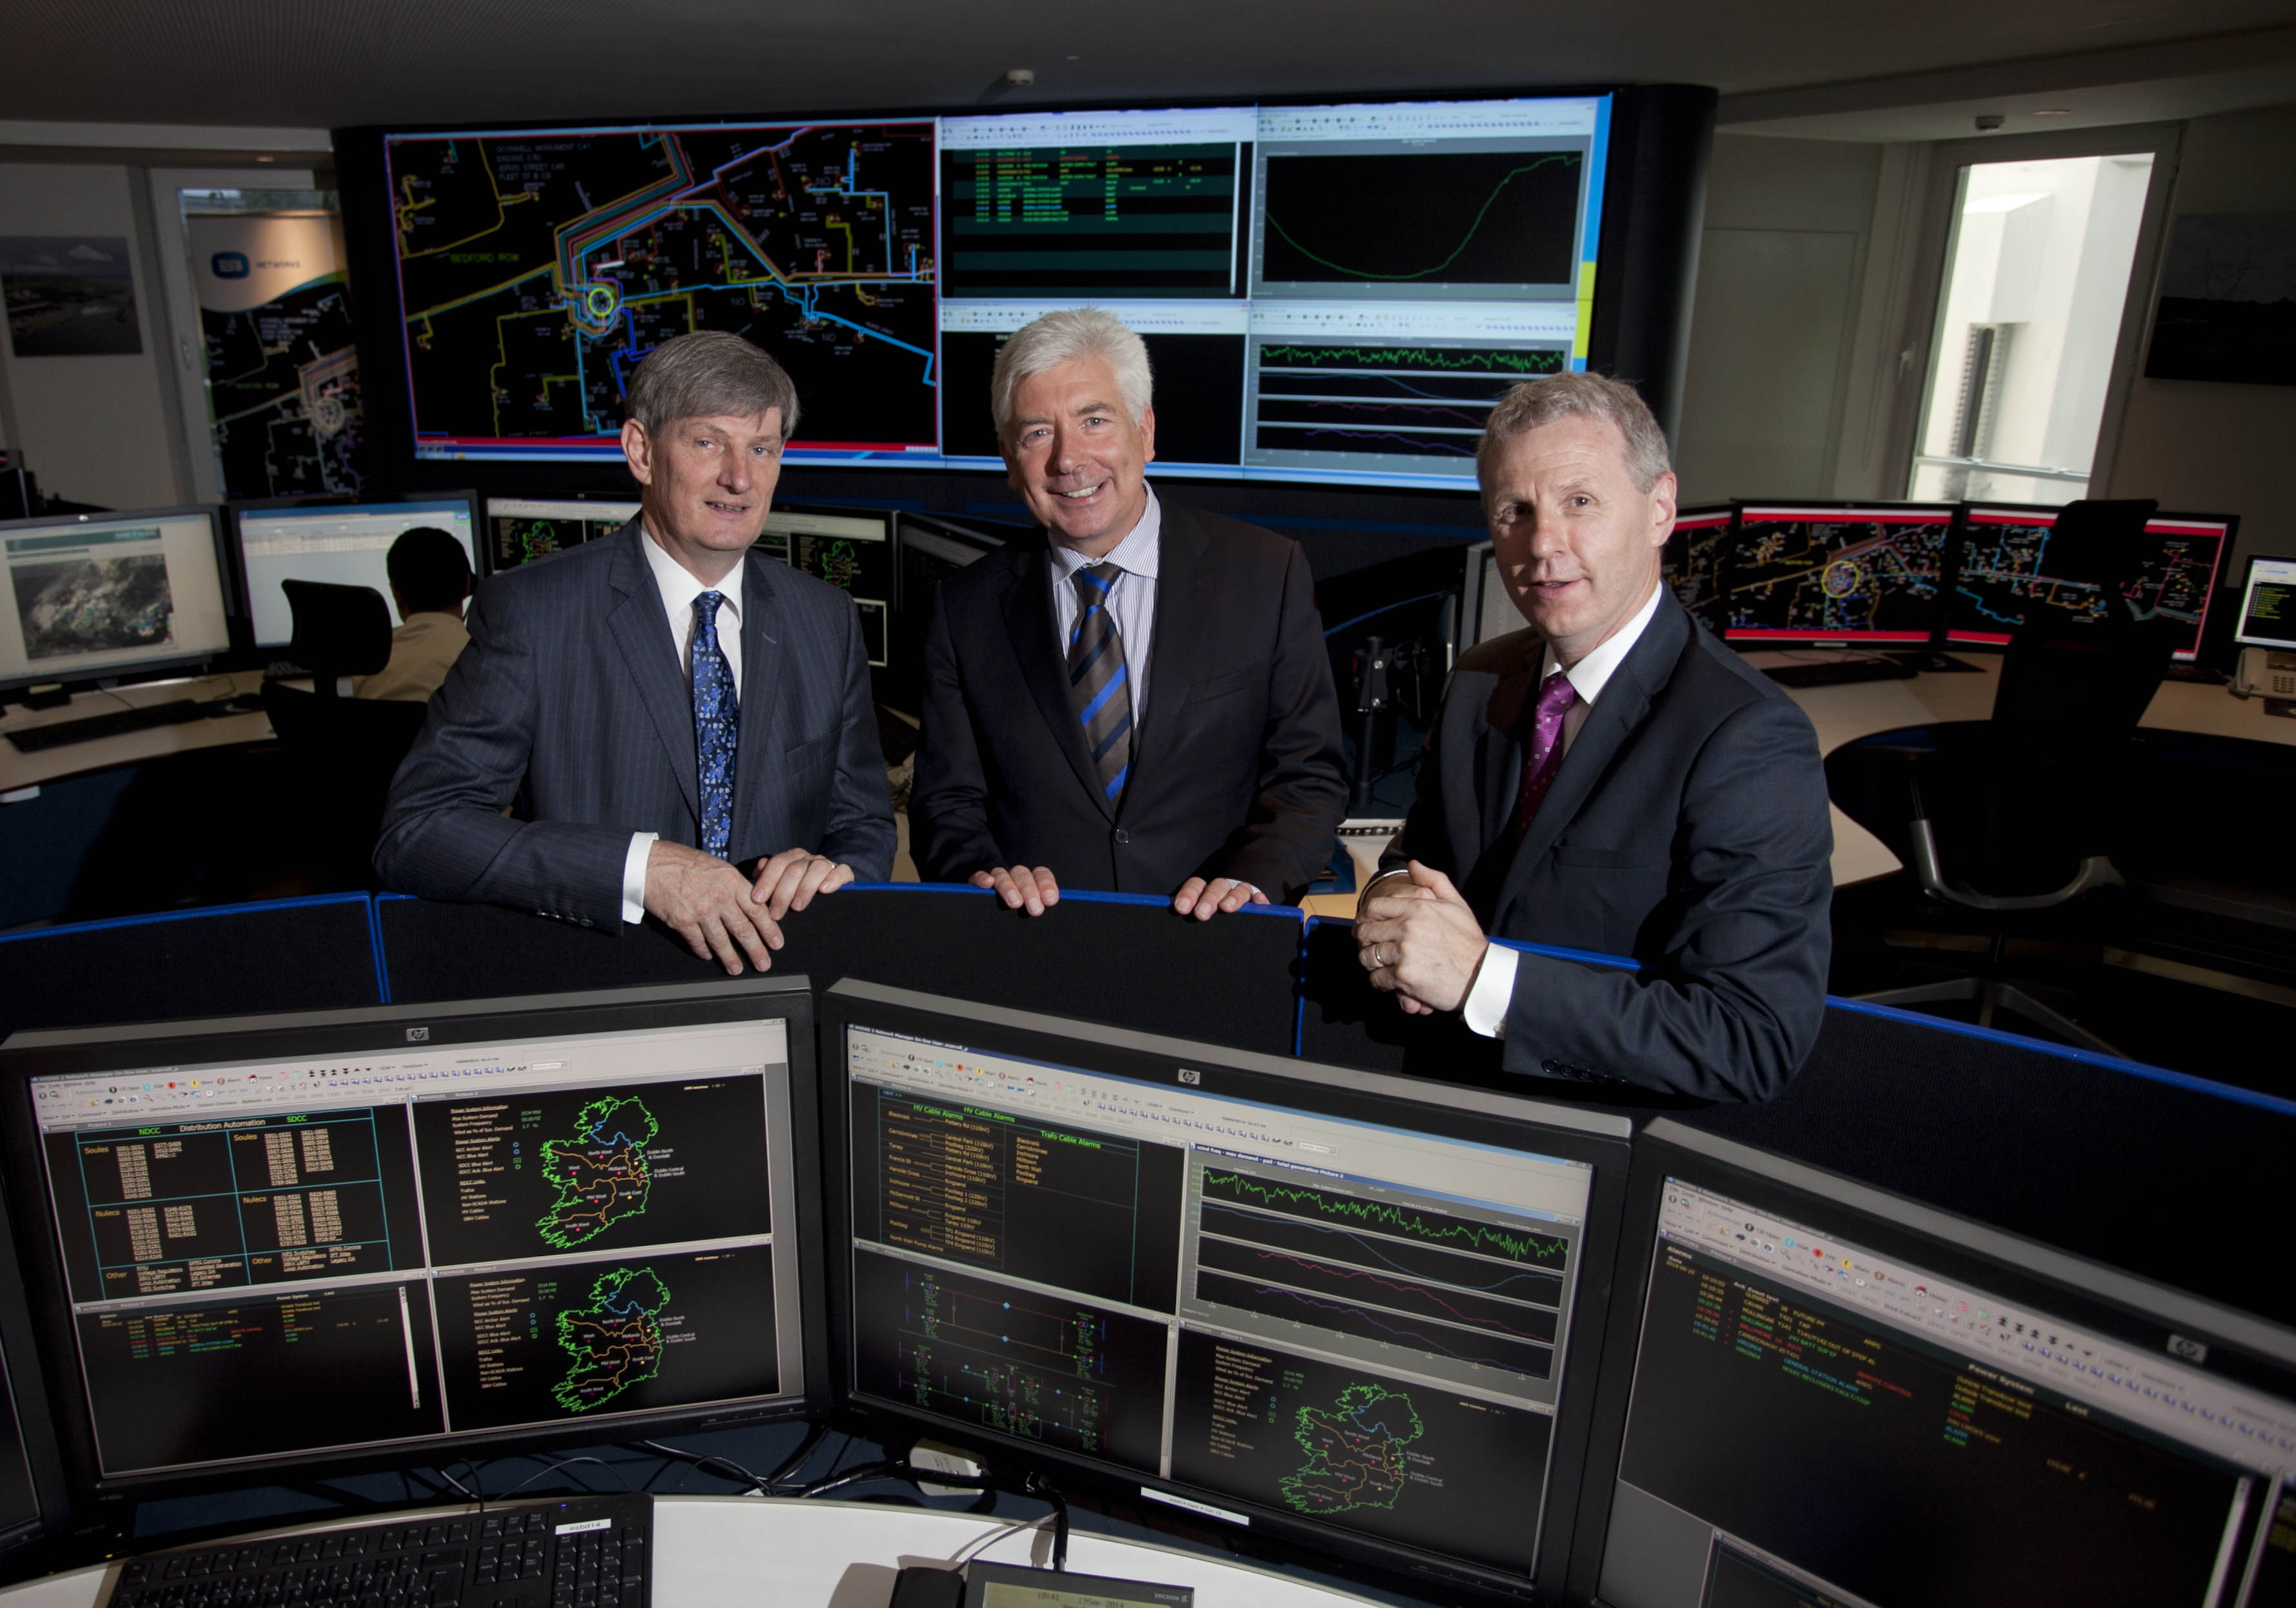 ESB Chief Executive, Pat O'Doherty, Minister for Communications, Energy and Natural Resources, Alex White TD and Jerry O'Sullivan, Managing Director ESB Networks Ltd at the launch of the ESB Networks new electricity Distribution Control Centre in South Dublin. The Control Centre, constructed at a cost of 4 million euro is among the most advanced in Europe and puts Ireland at the forefront of centralised electricity control.Photo Chris Bellew / Copyright Fennell Photography 2014